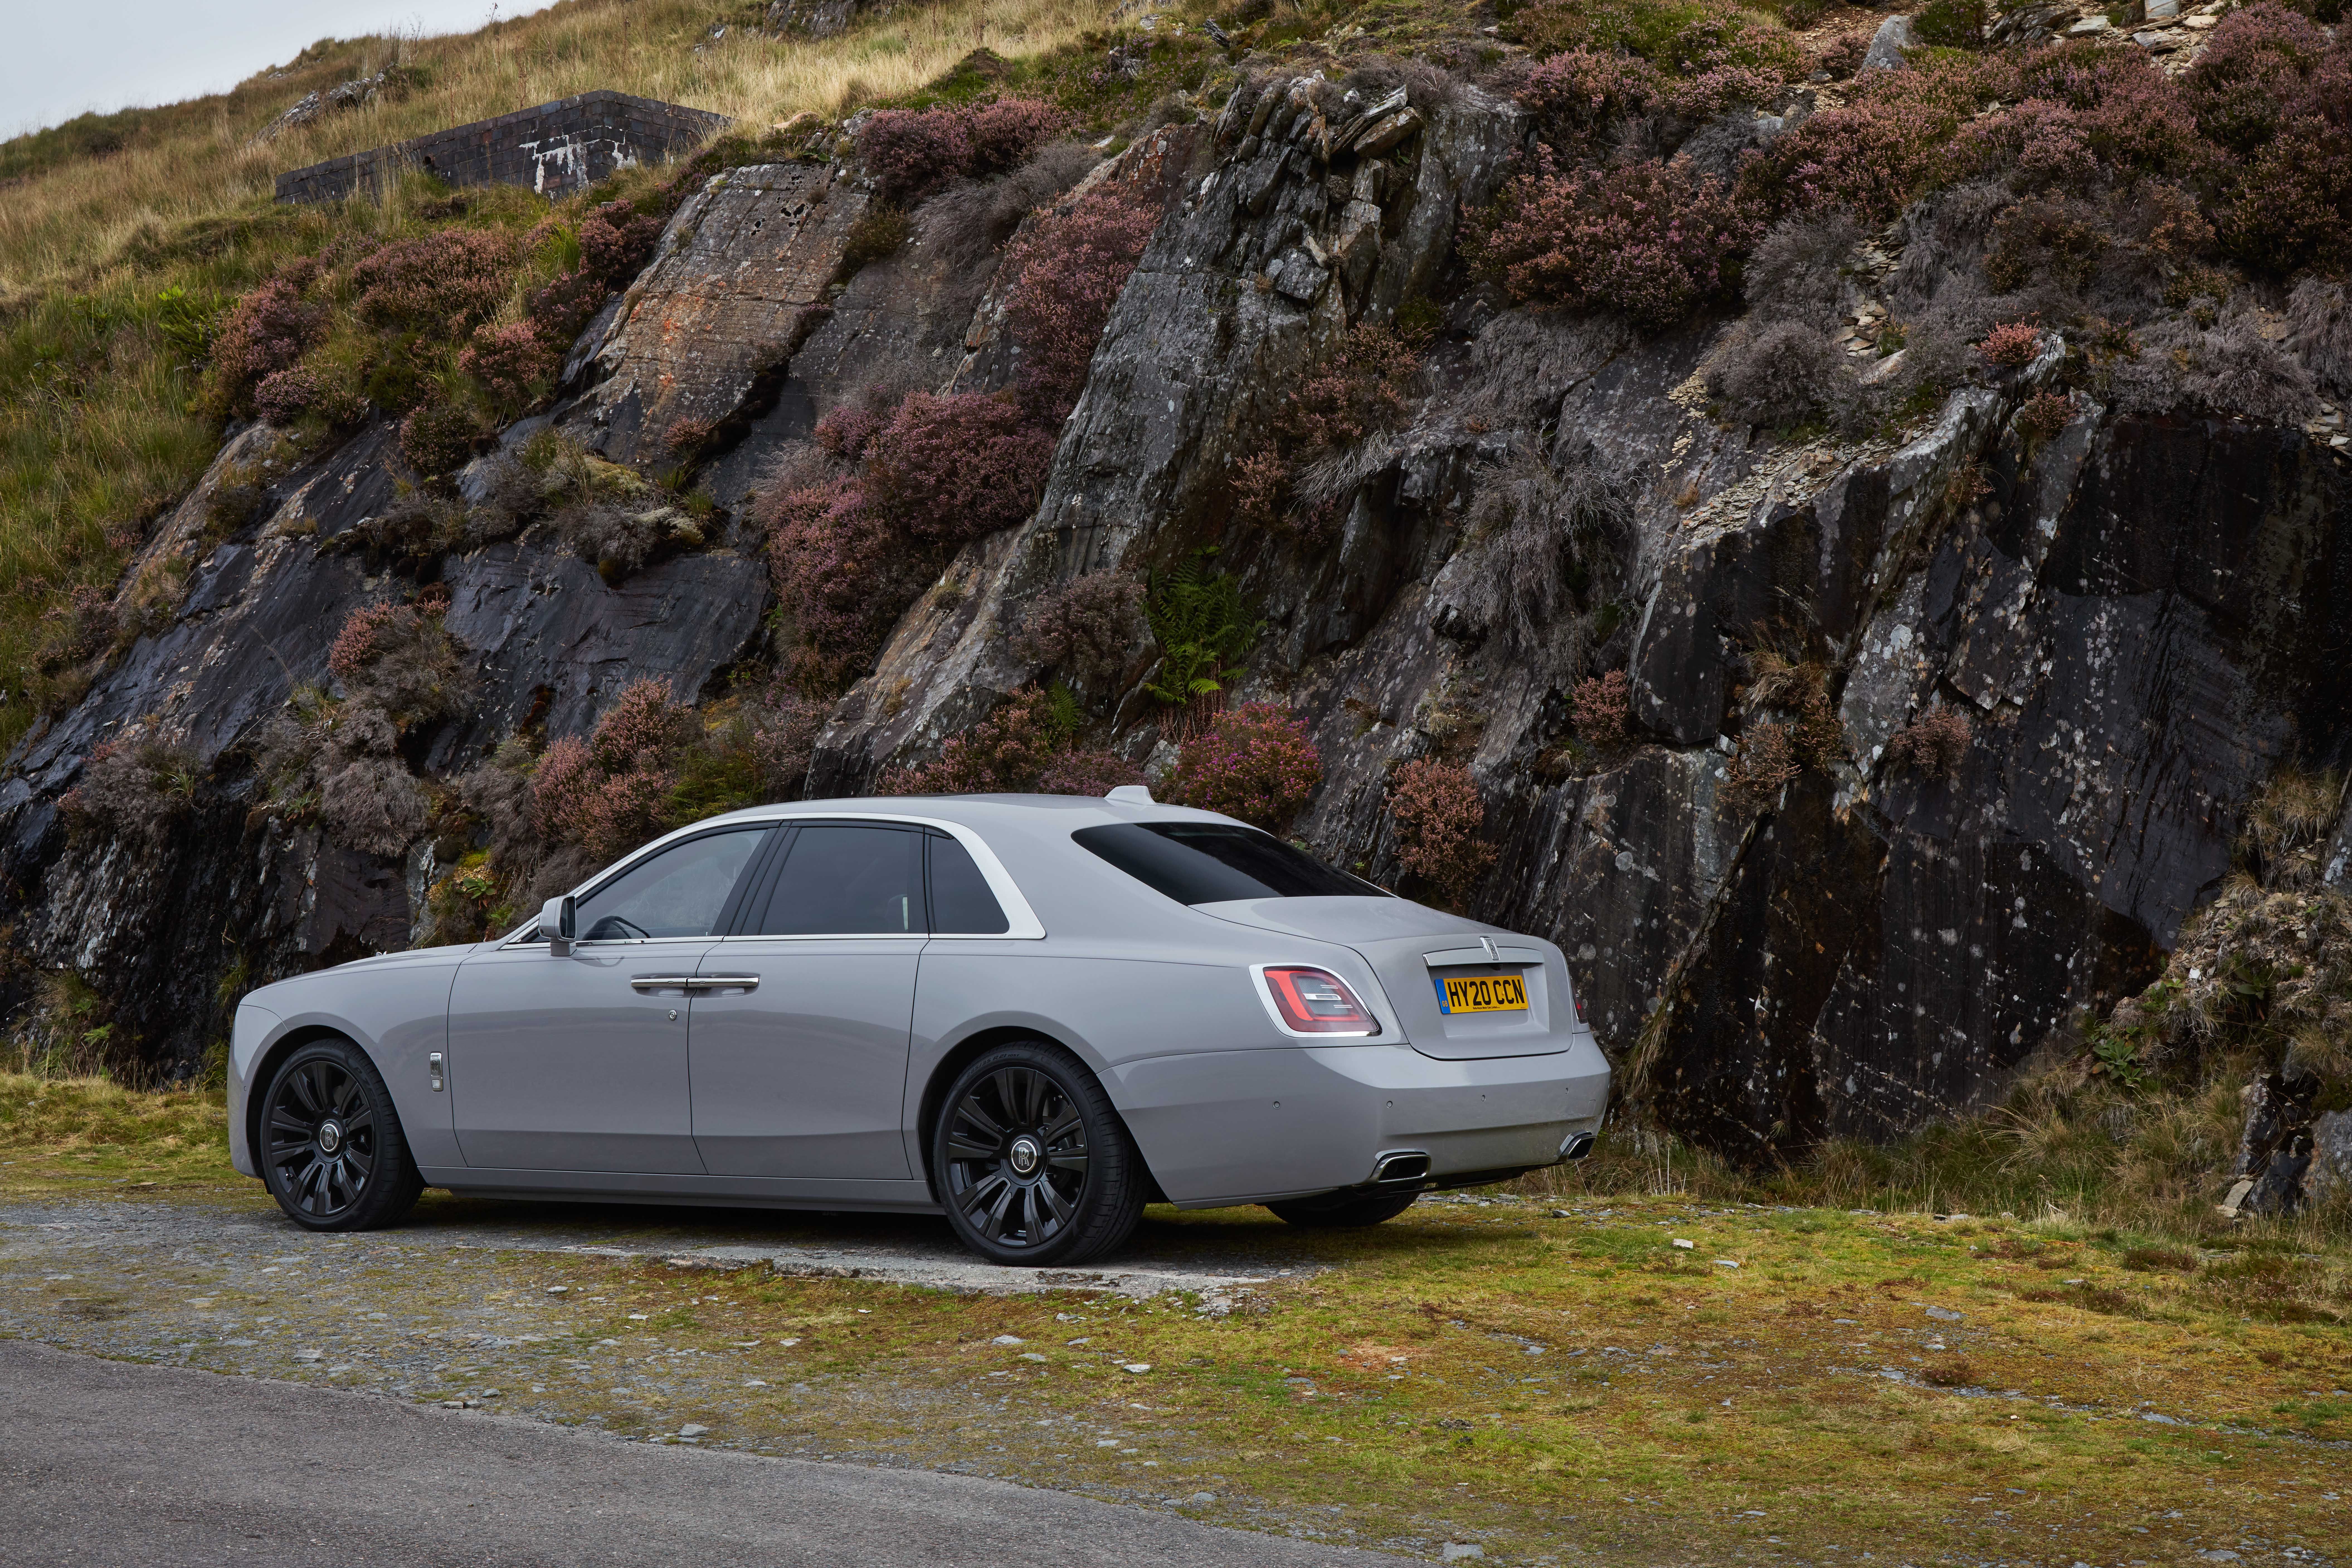 2021 Rolls-Royce Ghost Review: A $600,000 Oasis of Calm